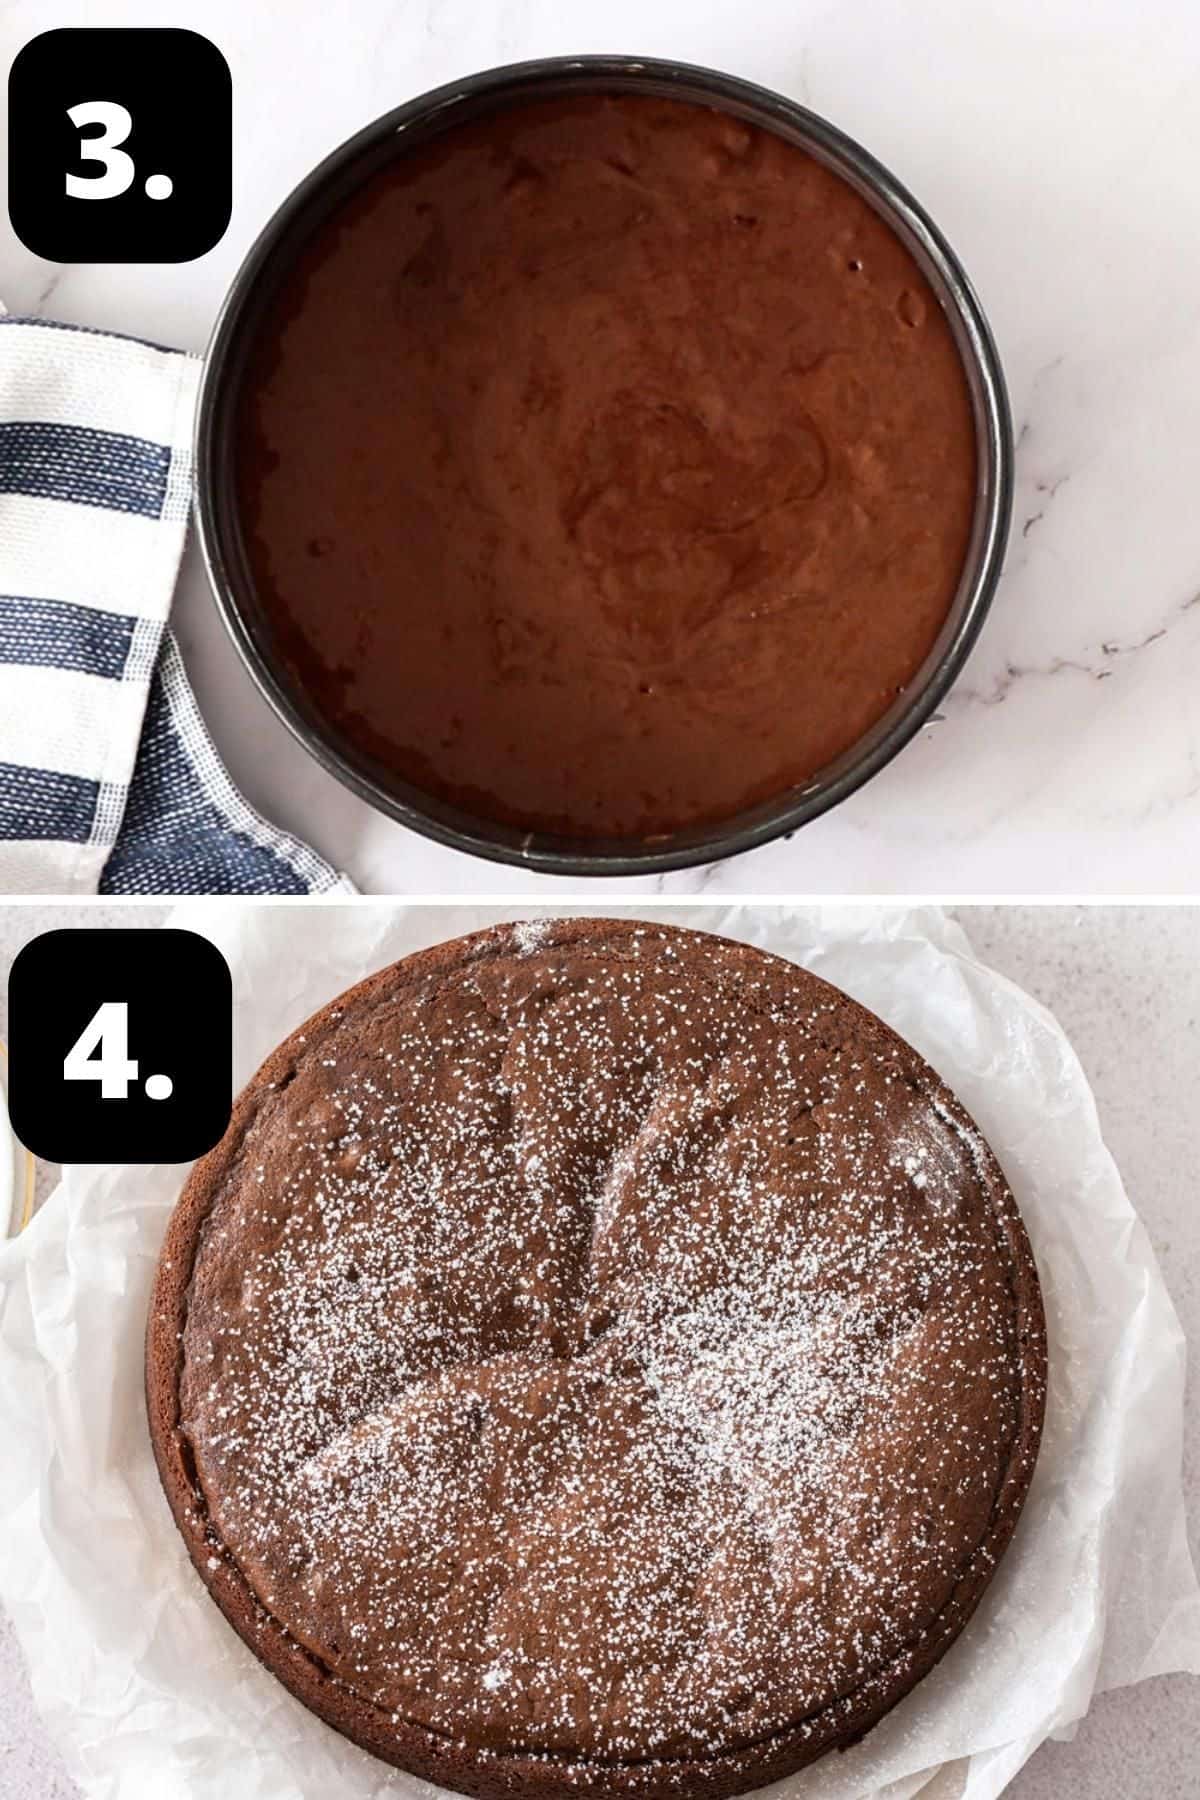 Steps 3-4 of preparing this recipe - the cake batter in the tin ready for the oven and the baked cake.